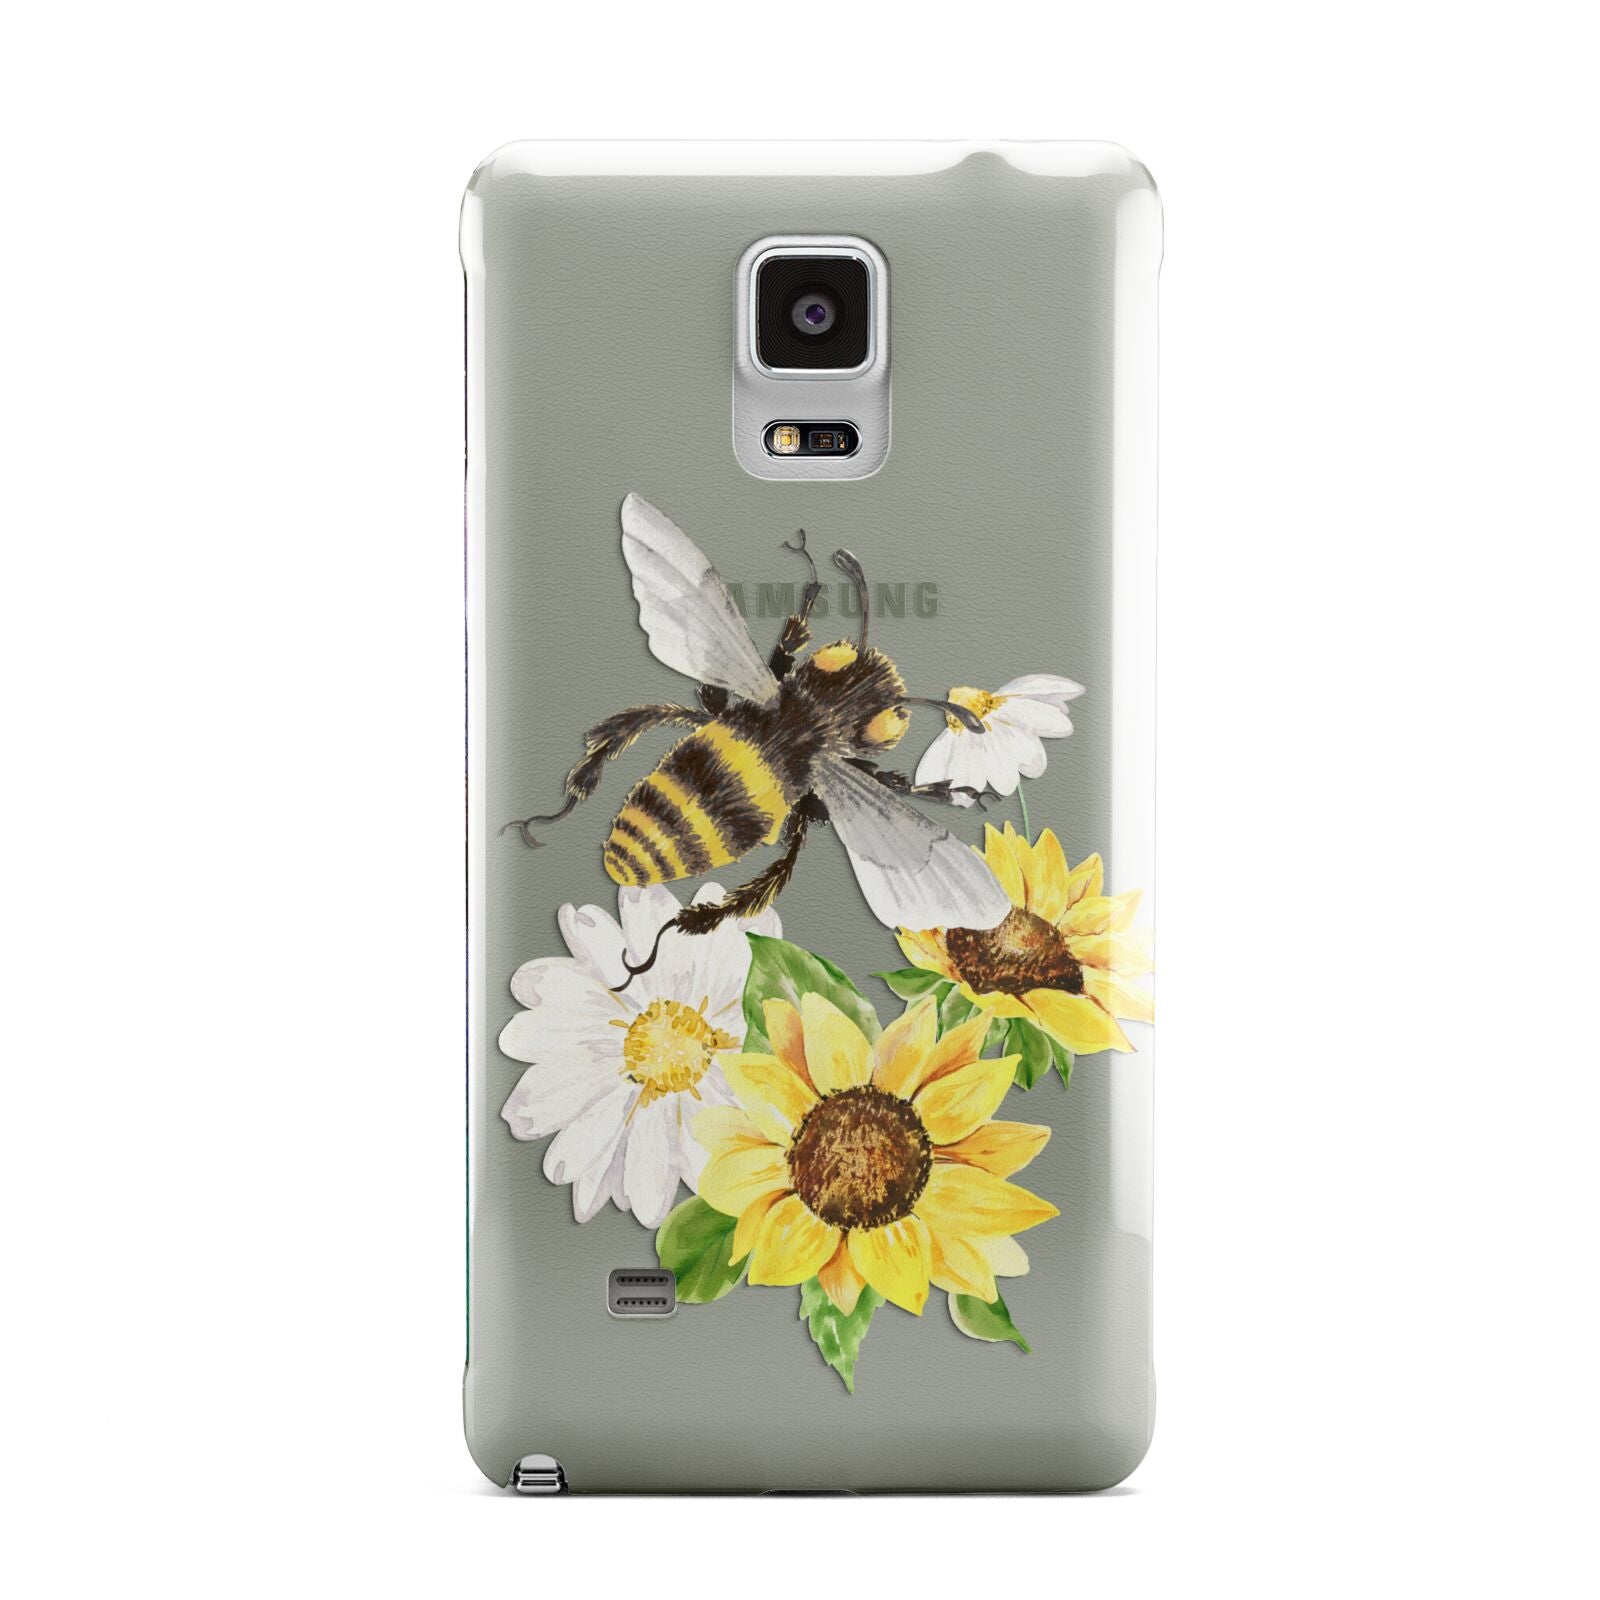 Watercolour Bee and Sunflowers Samsung Galaxy Note 4 Case